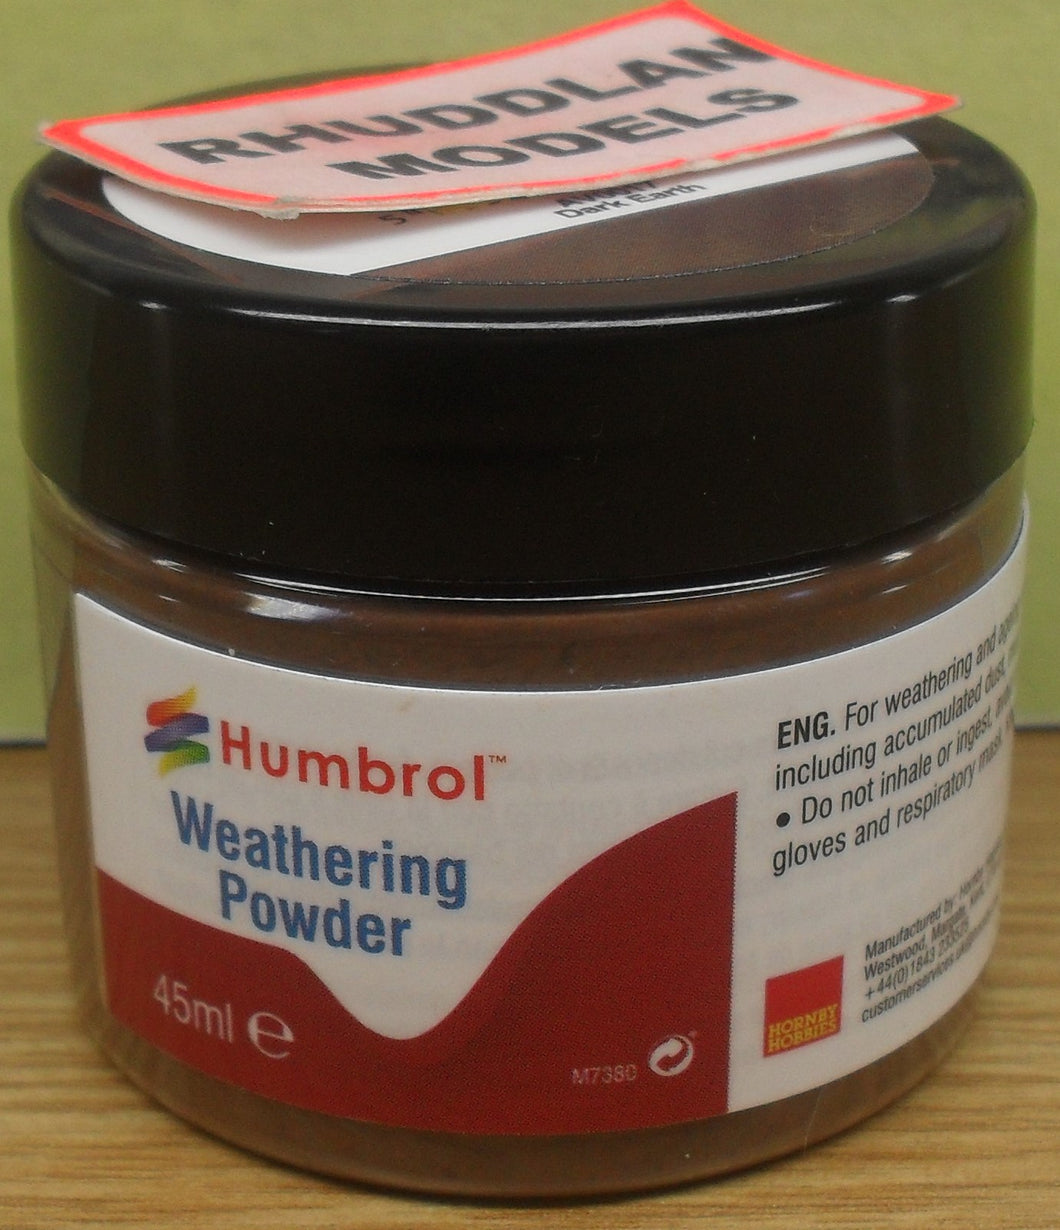 HUMBROL WEATHERING POWDER AV0017 DARK EARTH - (PRICE INCLIDES DELIVERY)